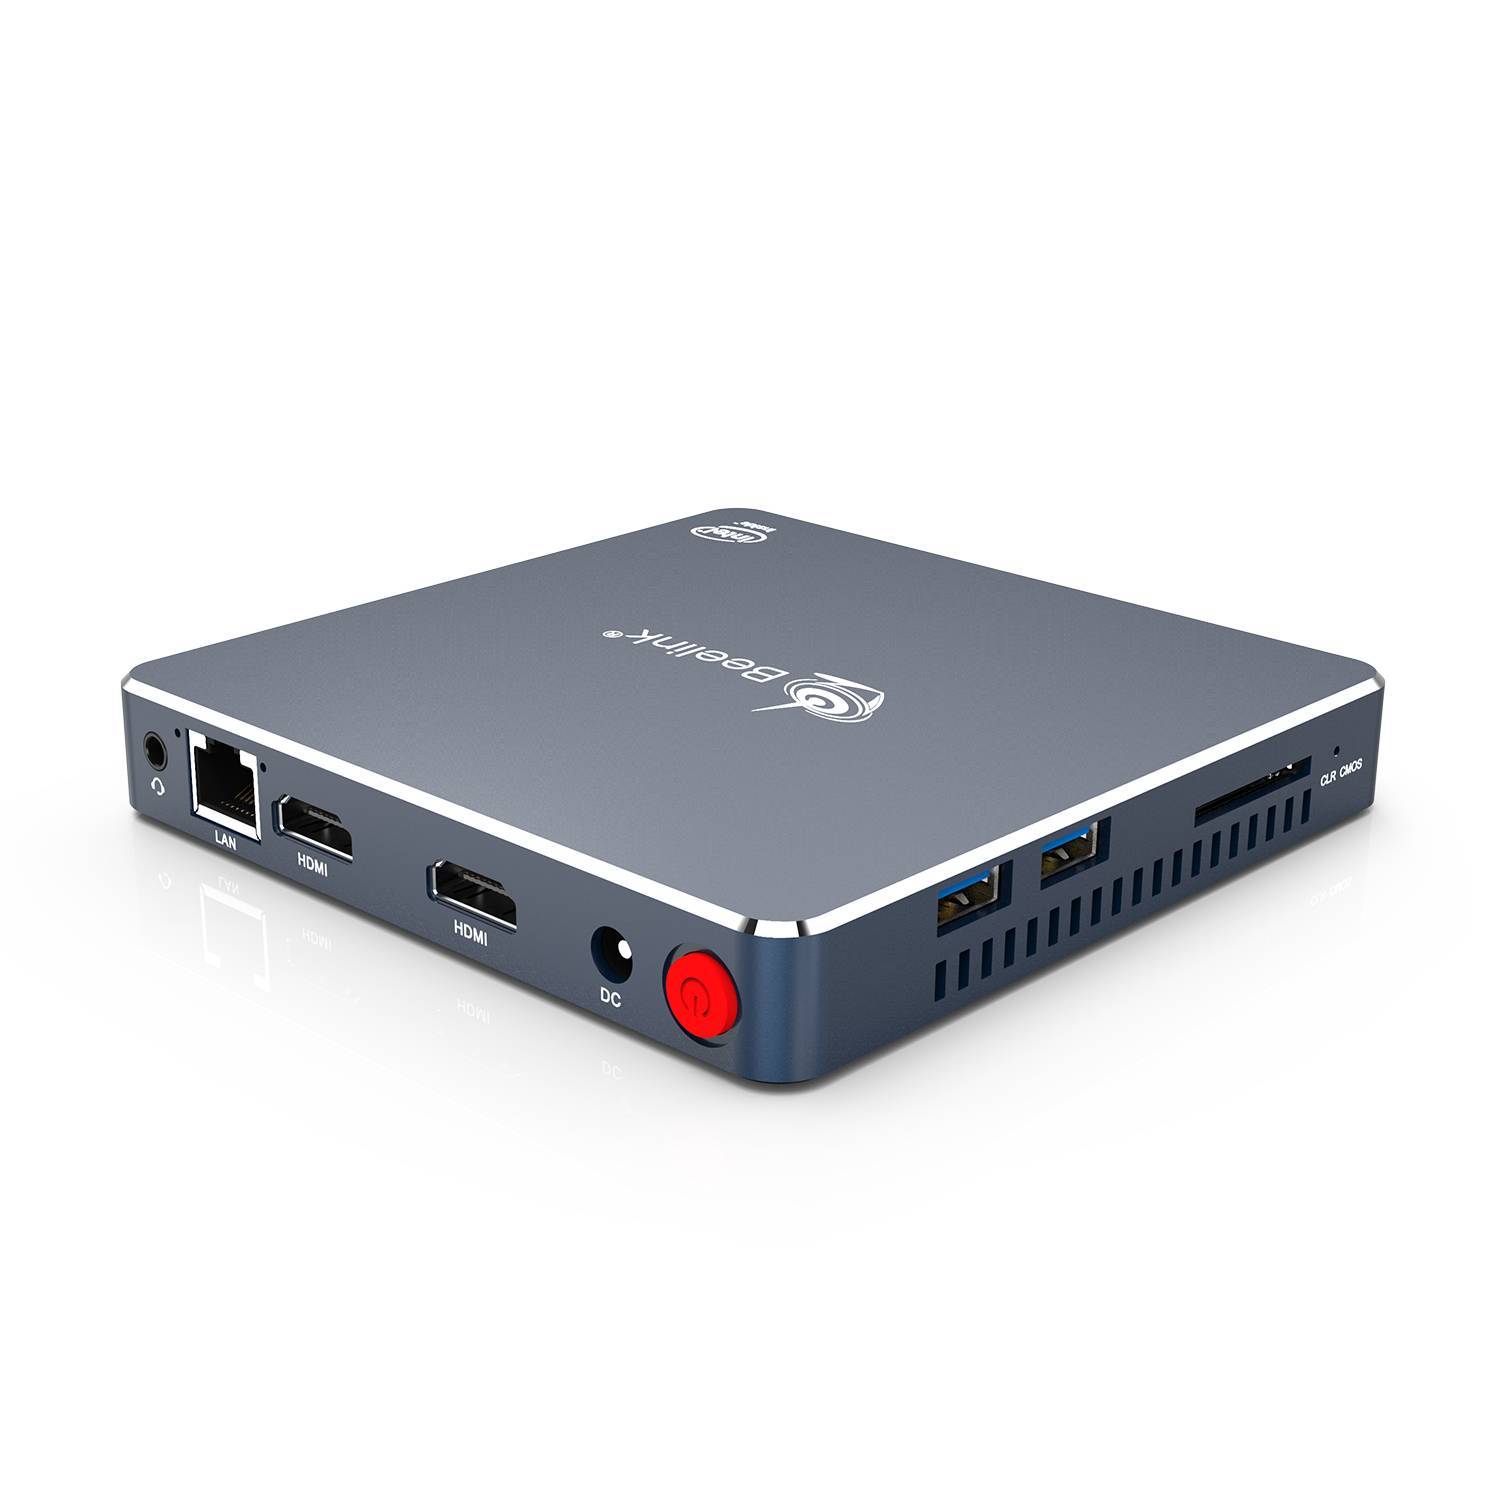 Beelink Gemini M Intel Mini PC Computer - Shown from corner with 2x USB Ports, Audio Jack, RJ45 Ethernet Port, dual HDMI, power plug and button from the back and 2x USB Ports and SD Card slot